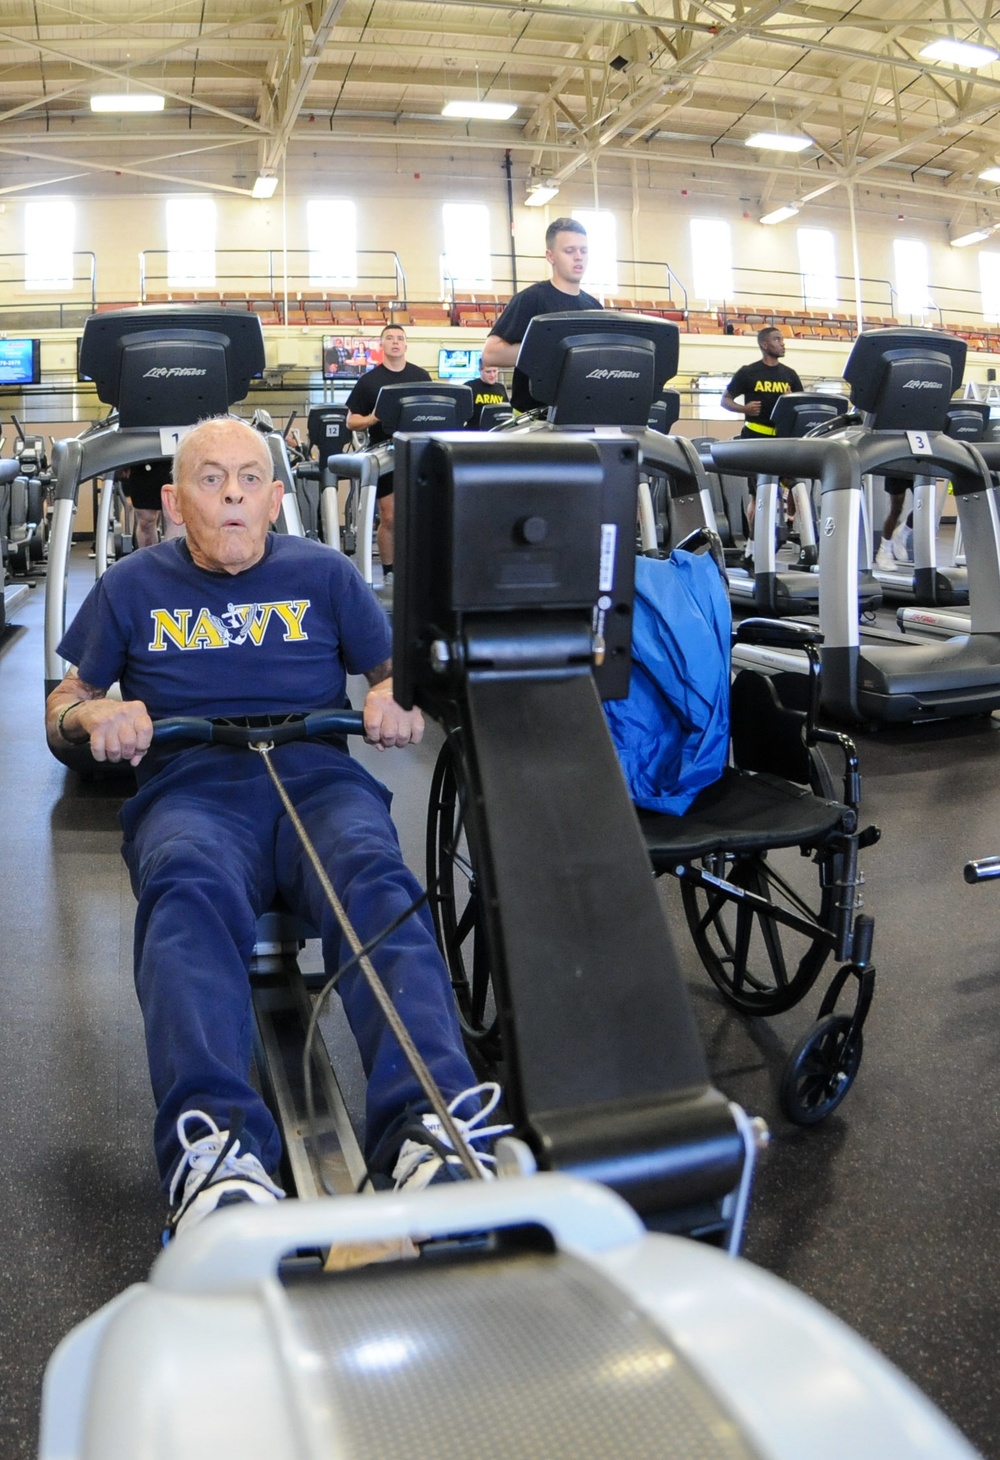 Neither the gym, house chores or being disabled will stop this retired Navy Chief Petty Officer from staying active